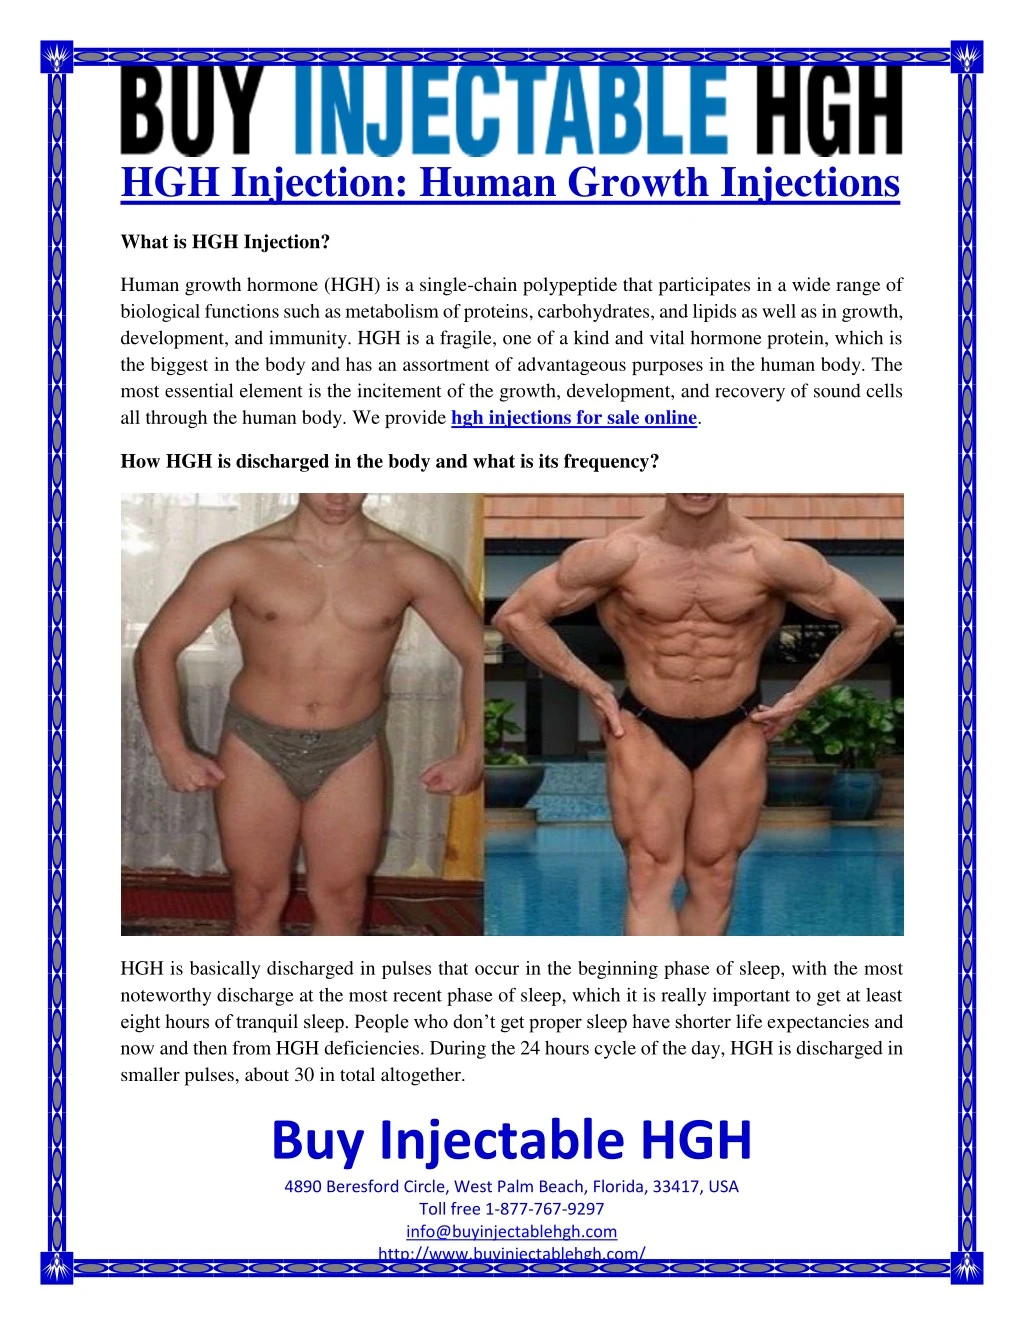 hgh injection human growth injections